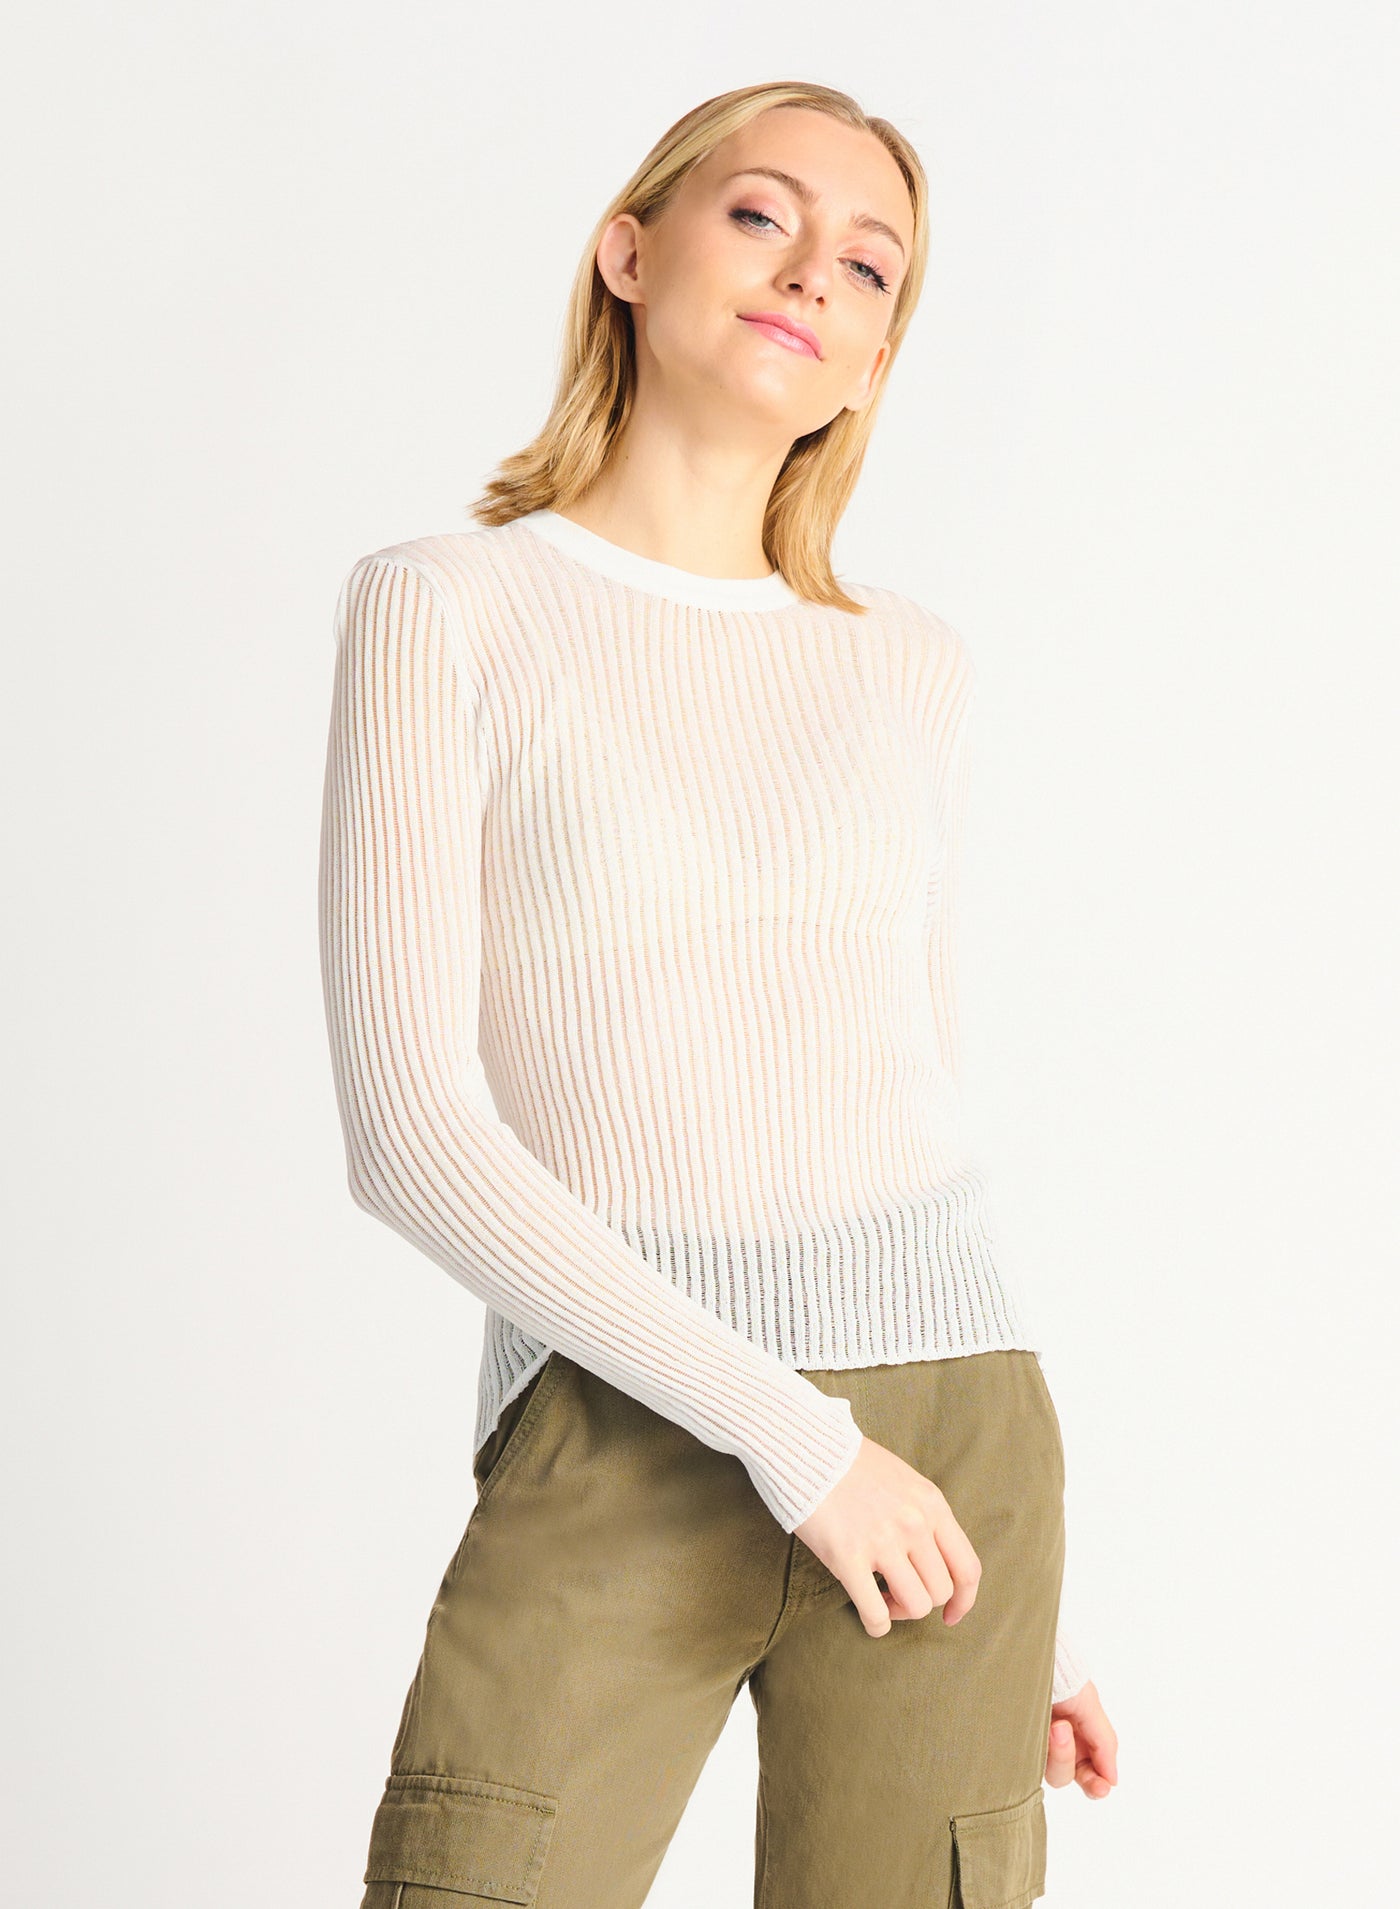 GLAMLY SWEATER TOP- white or soft timber wolf